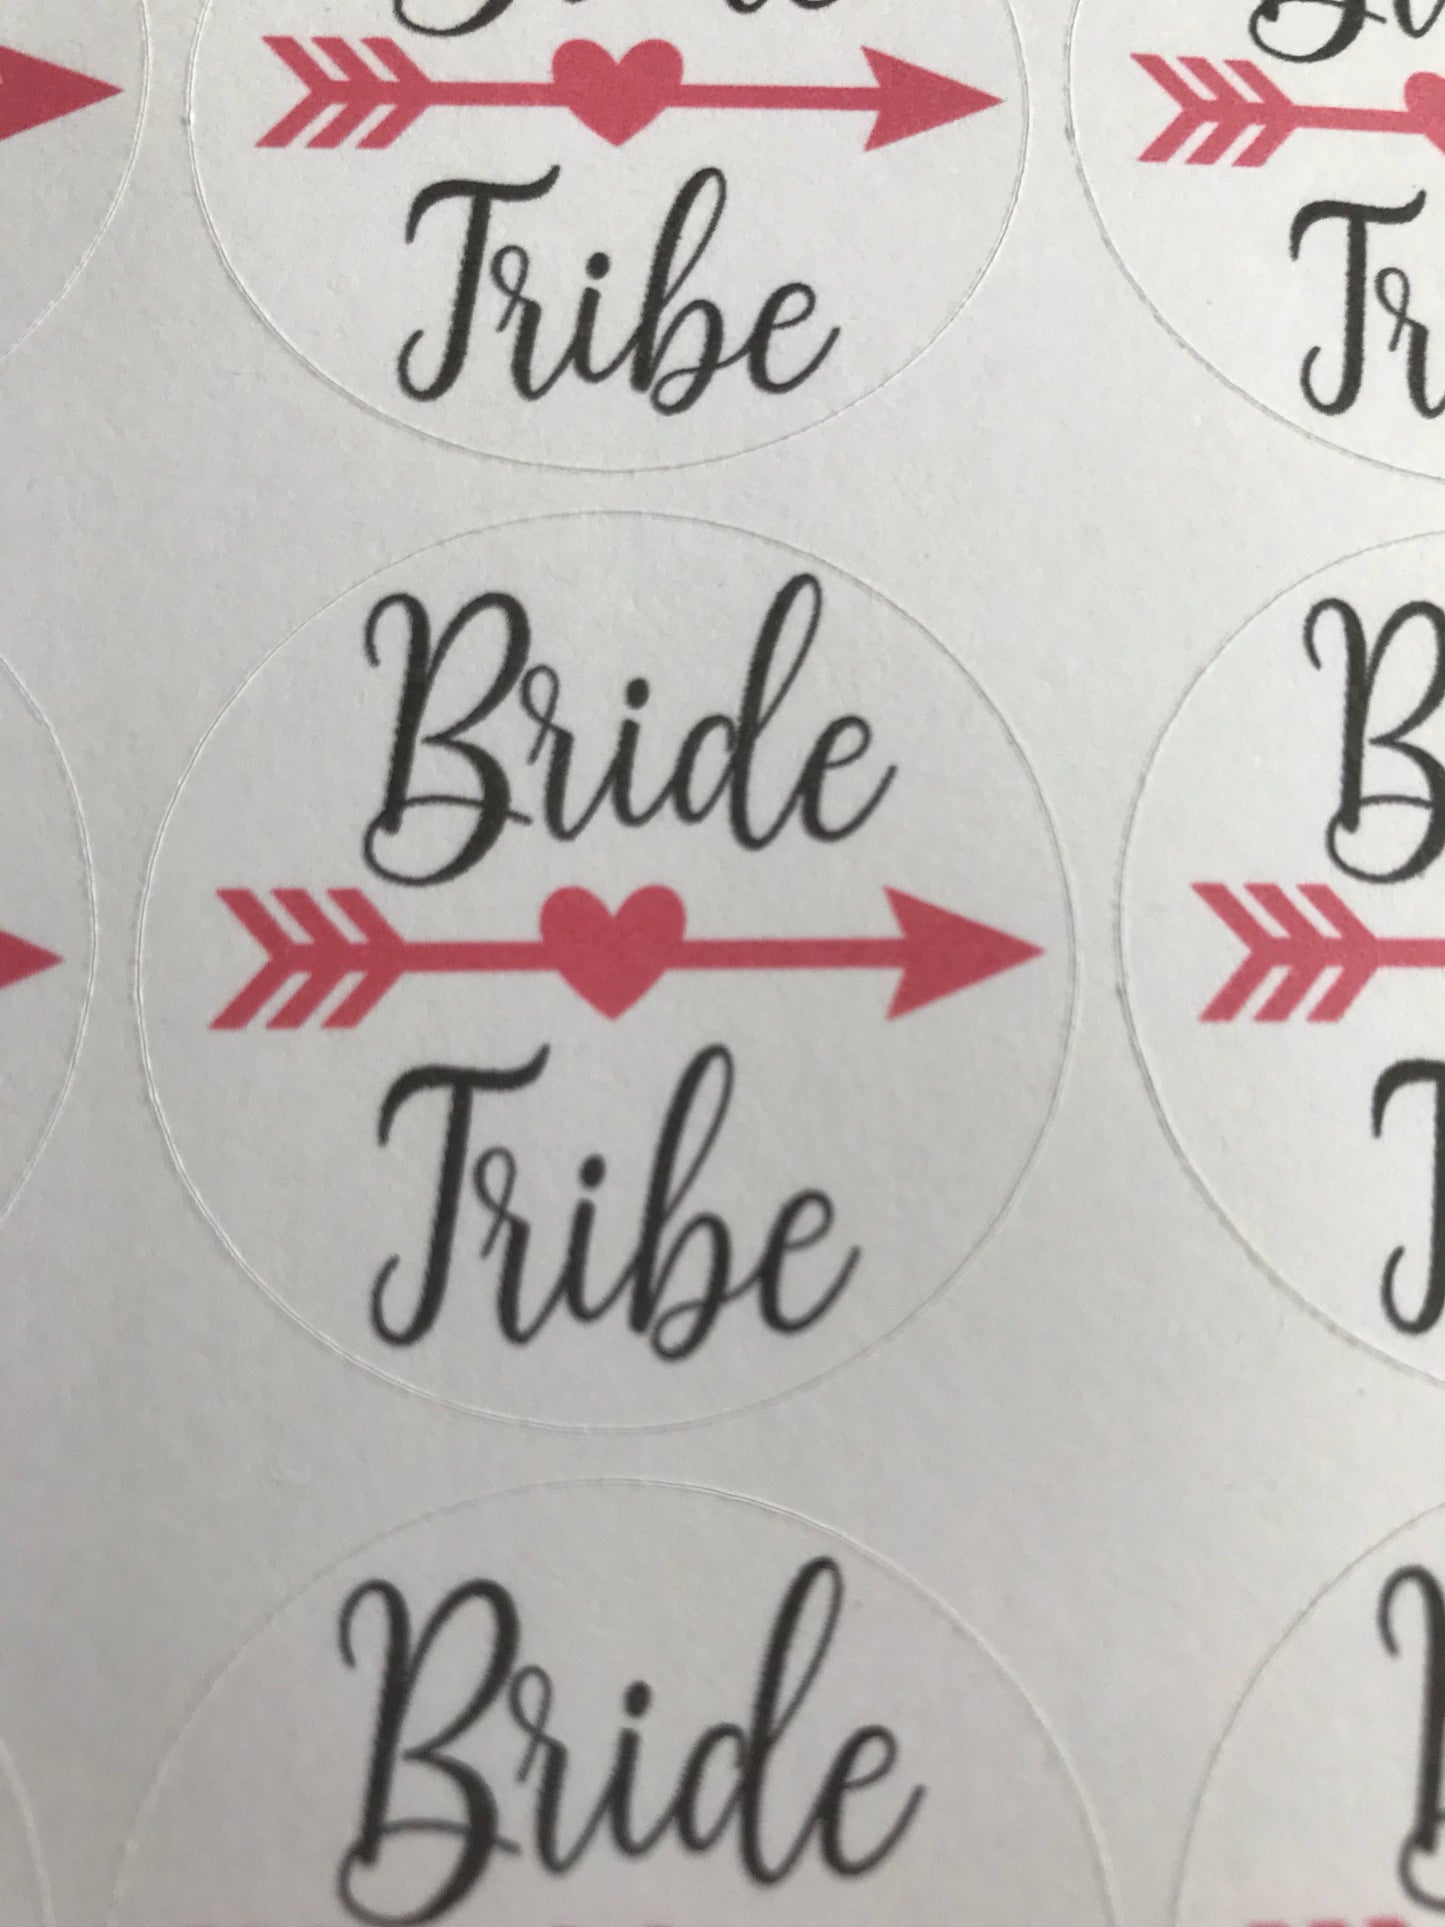 Bride Tribe stickers, Bridal Stickers, Hen party stickers, stickers